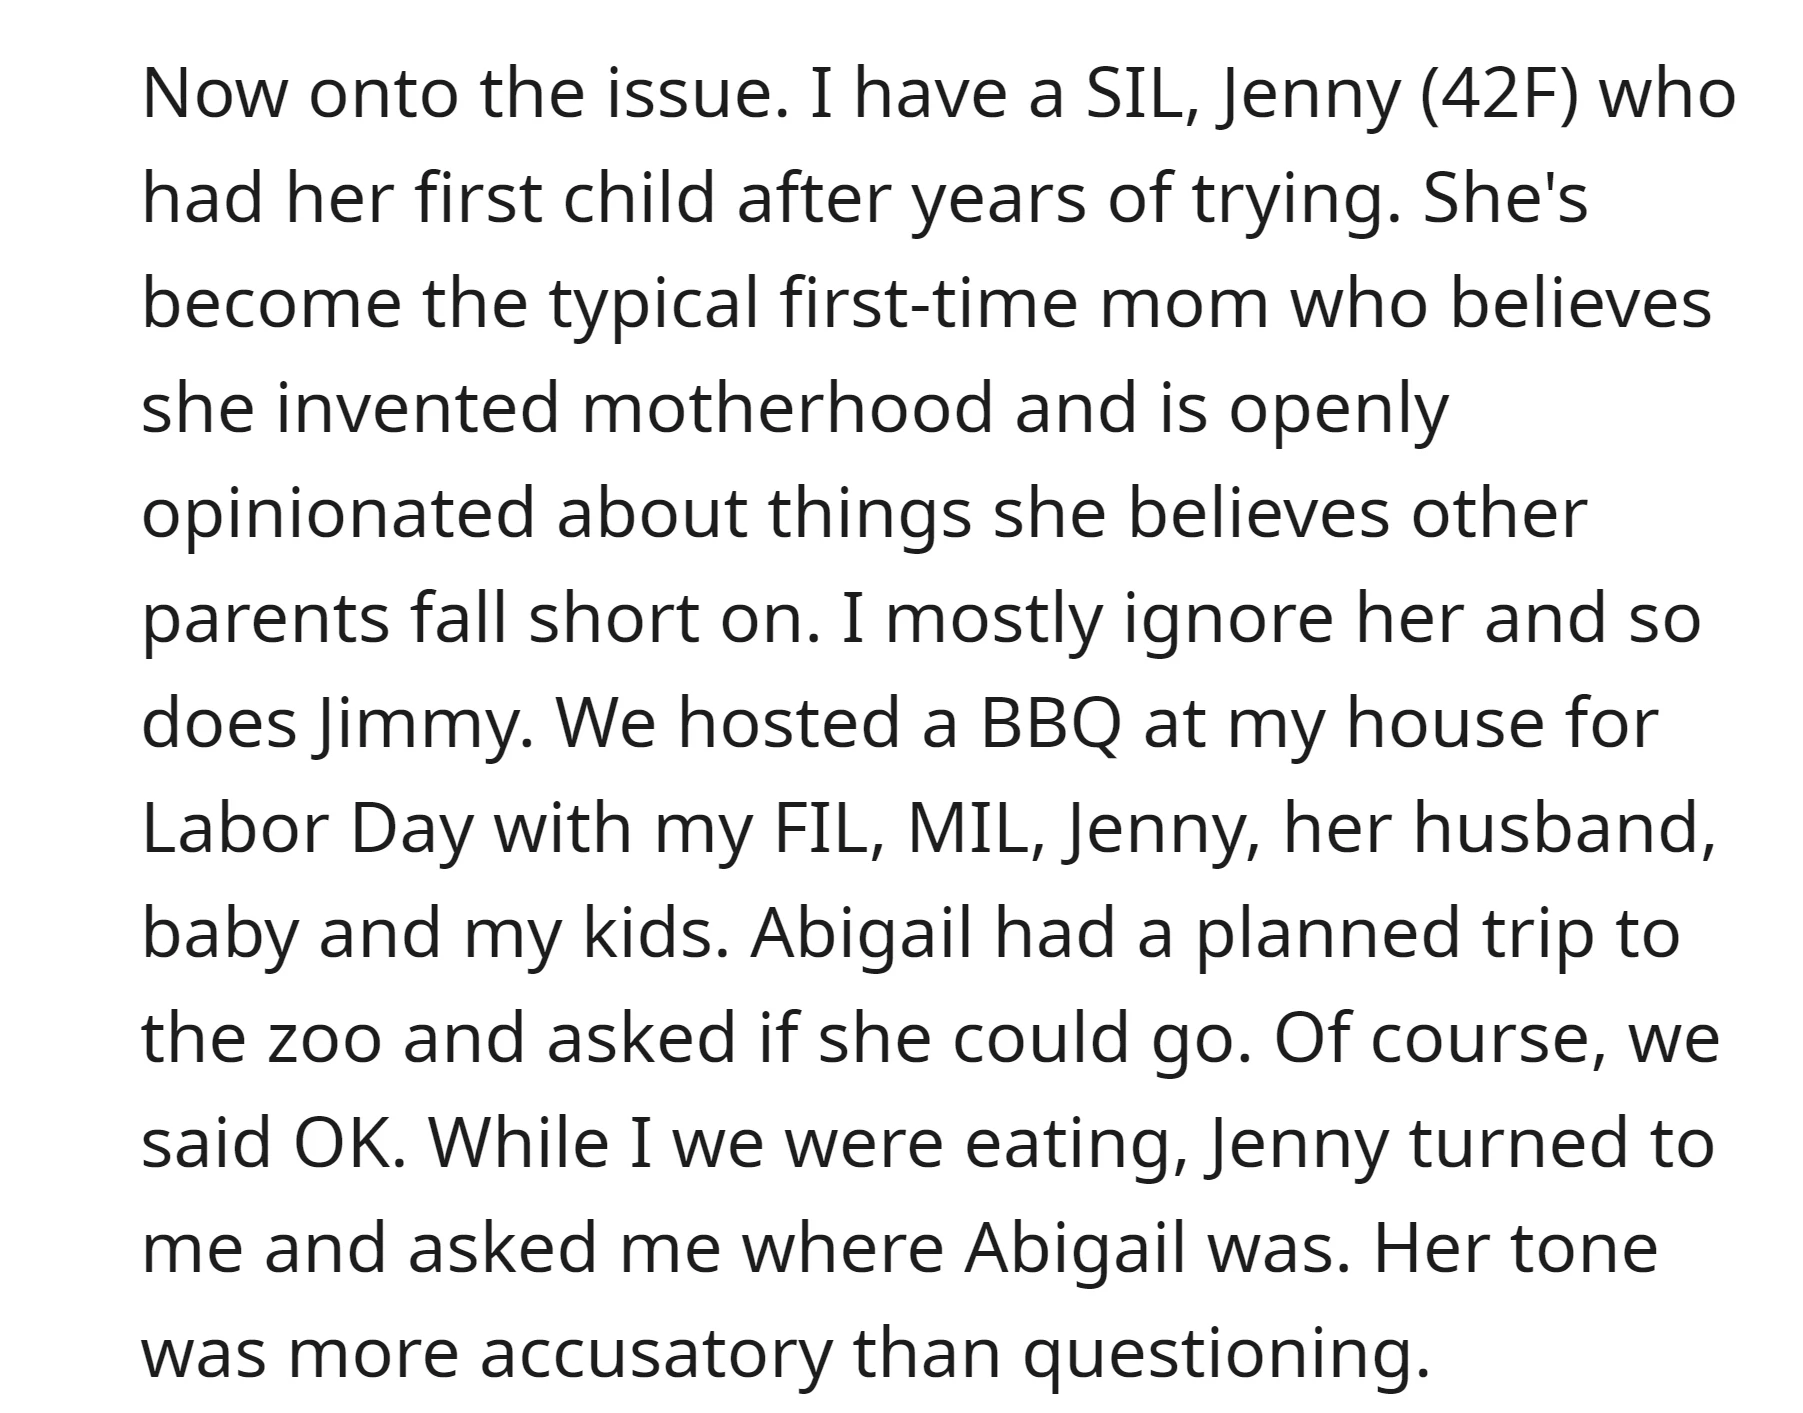 During a BBQ party at OP's house, her SIL questioned the absence of Abigail